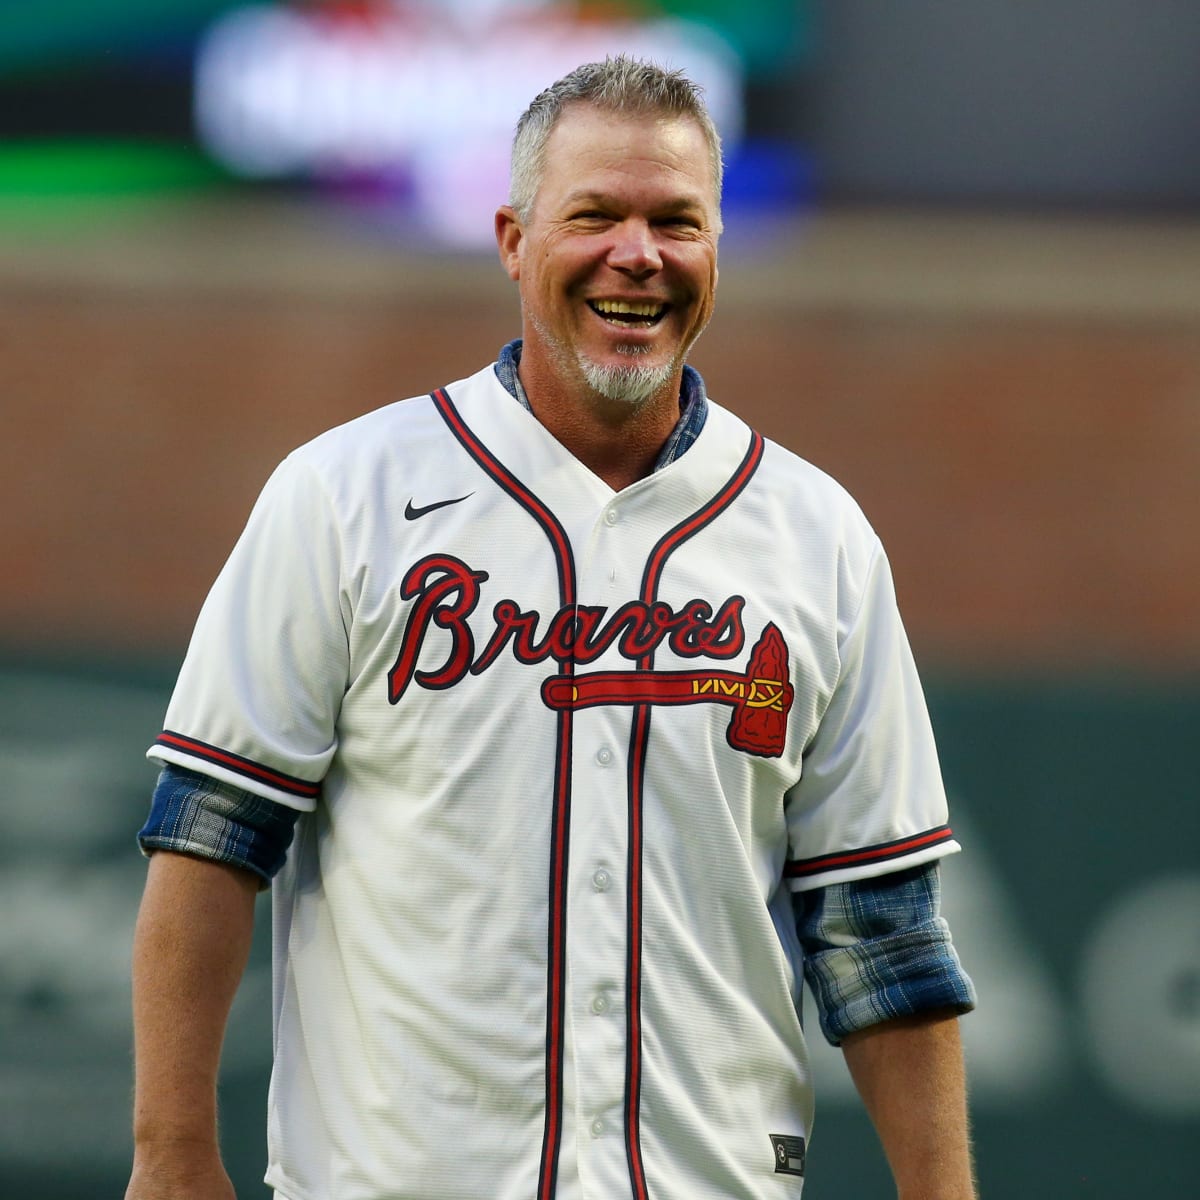 Atlanta Braves are set for Alumni Weekend at Truist Park and The